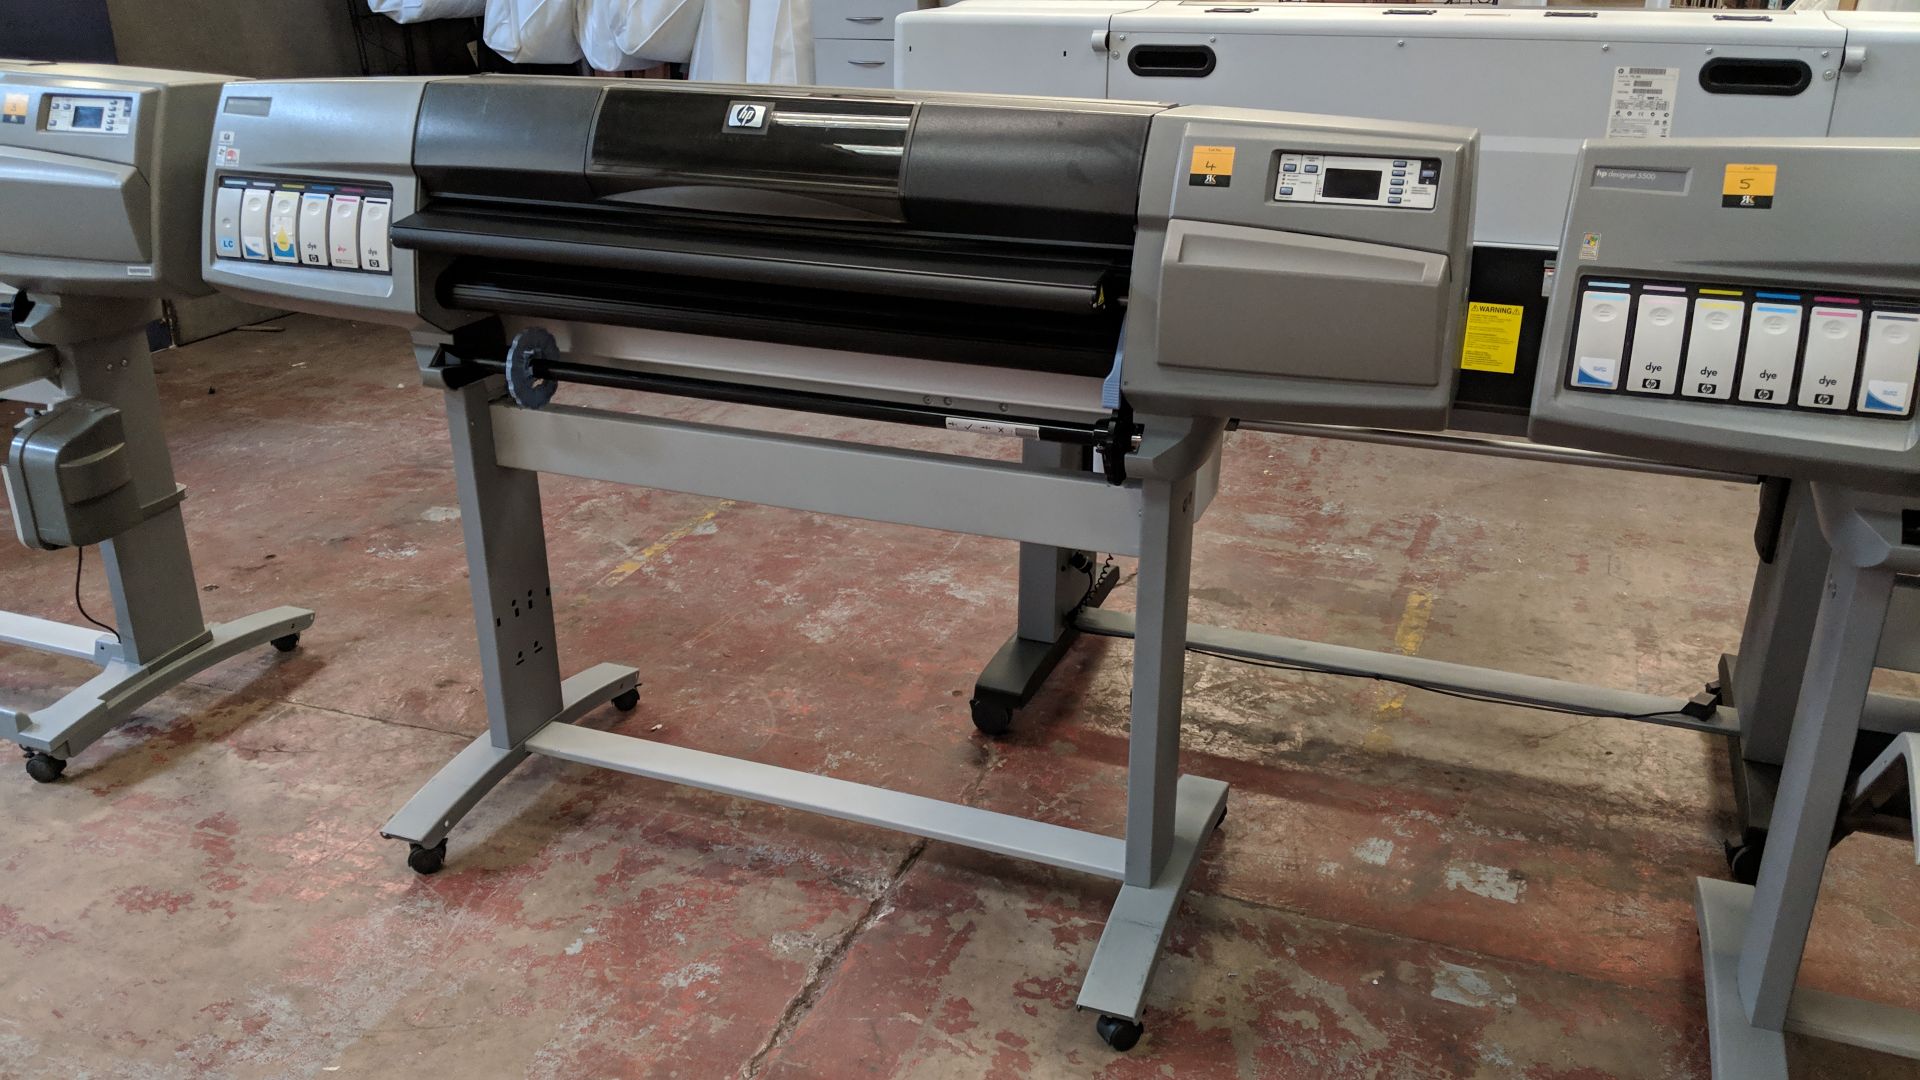 HP DesignJet 5500PS wide format printer, model Q1251/2A. 42 inch width IMPORTANT: Please remember - Image 3 of 8